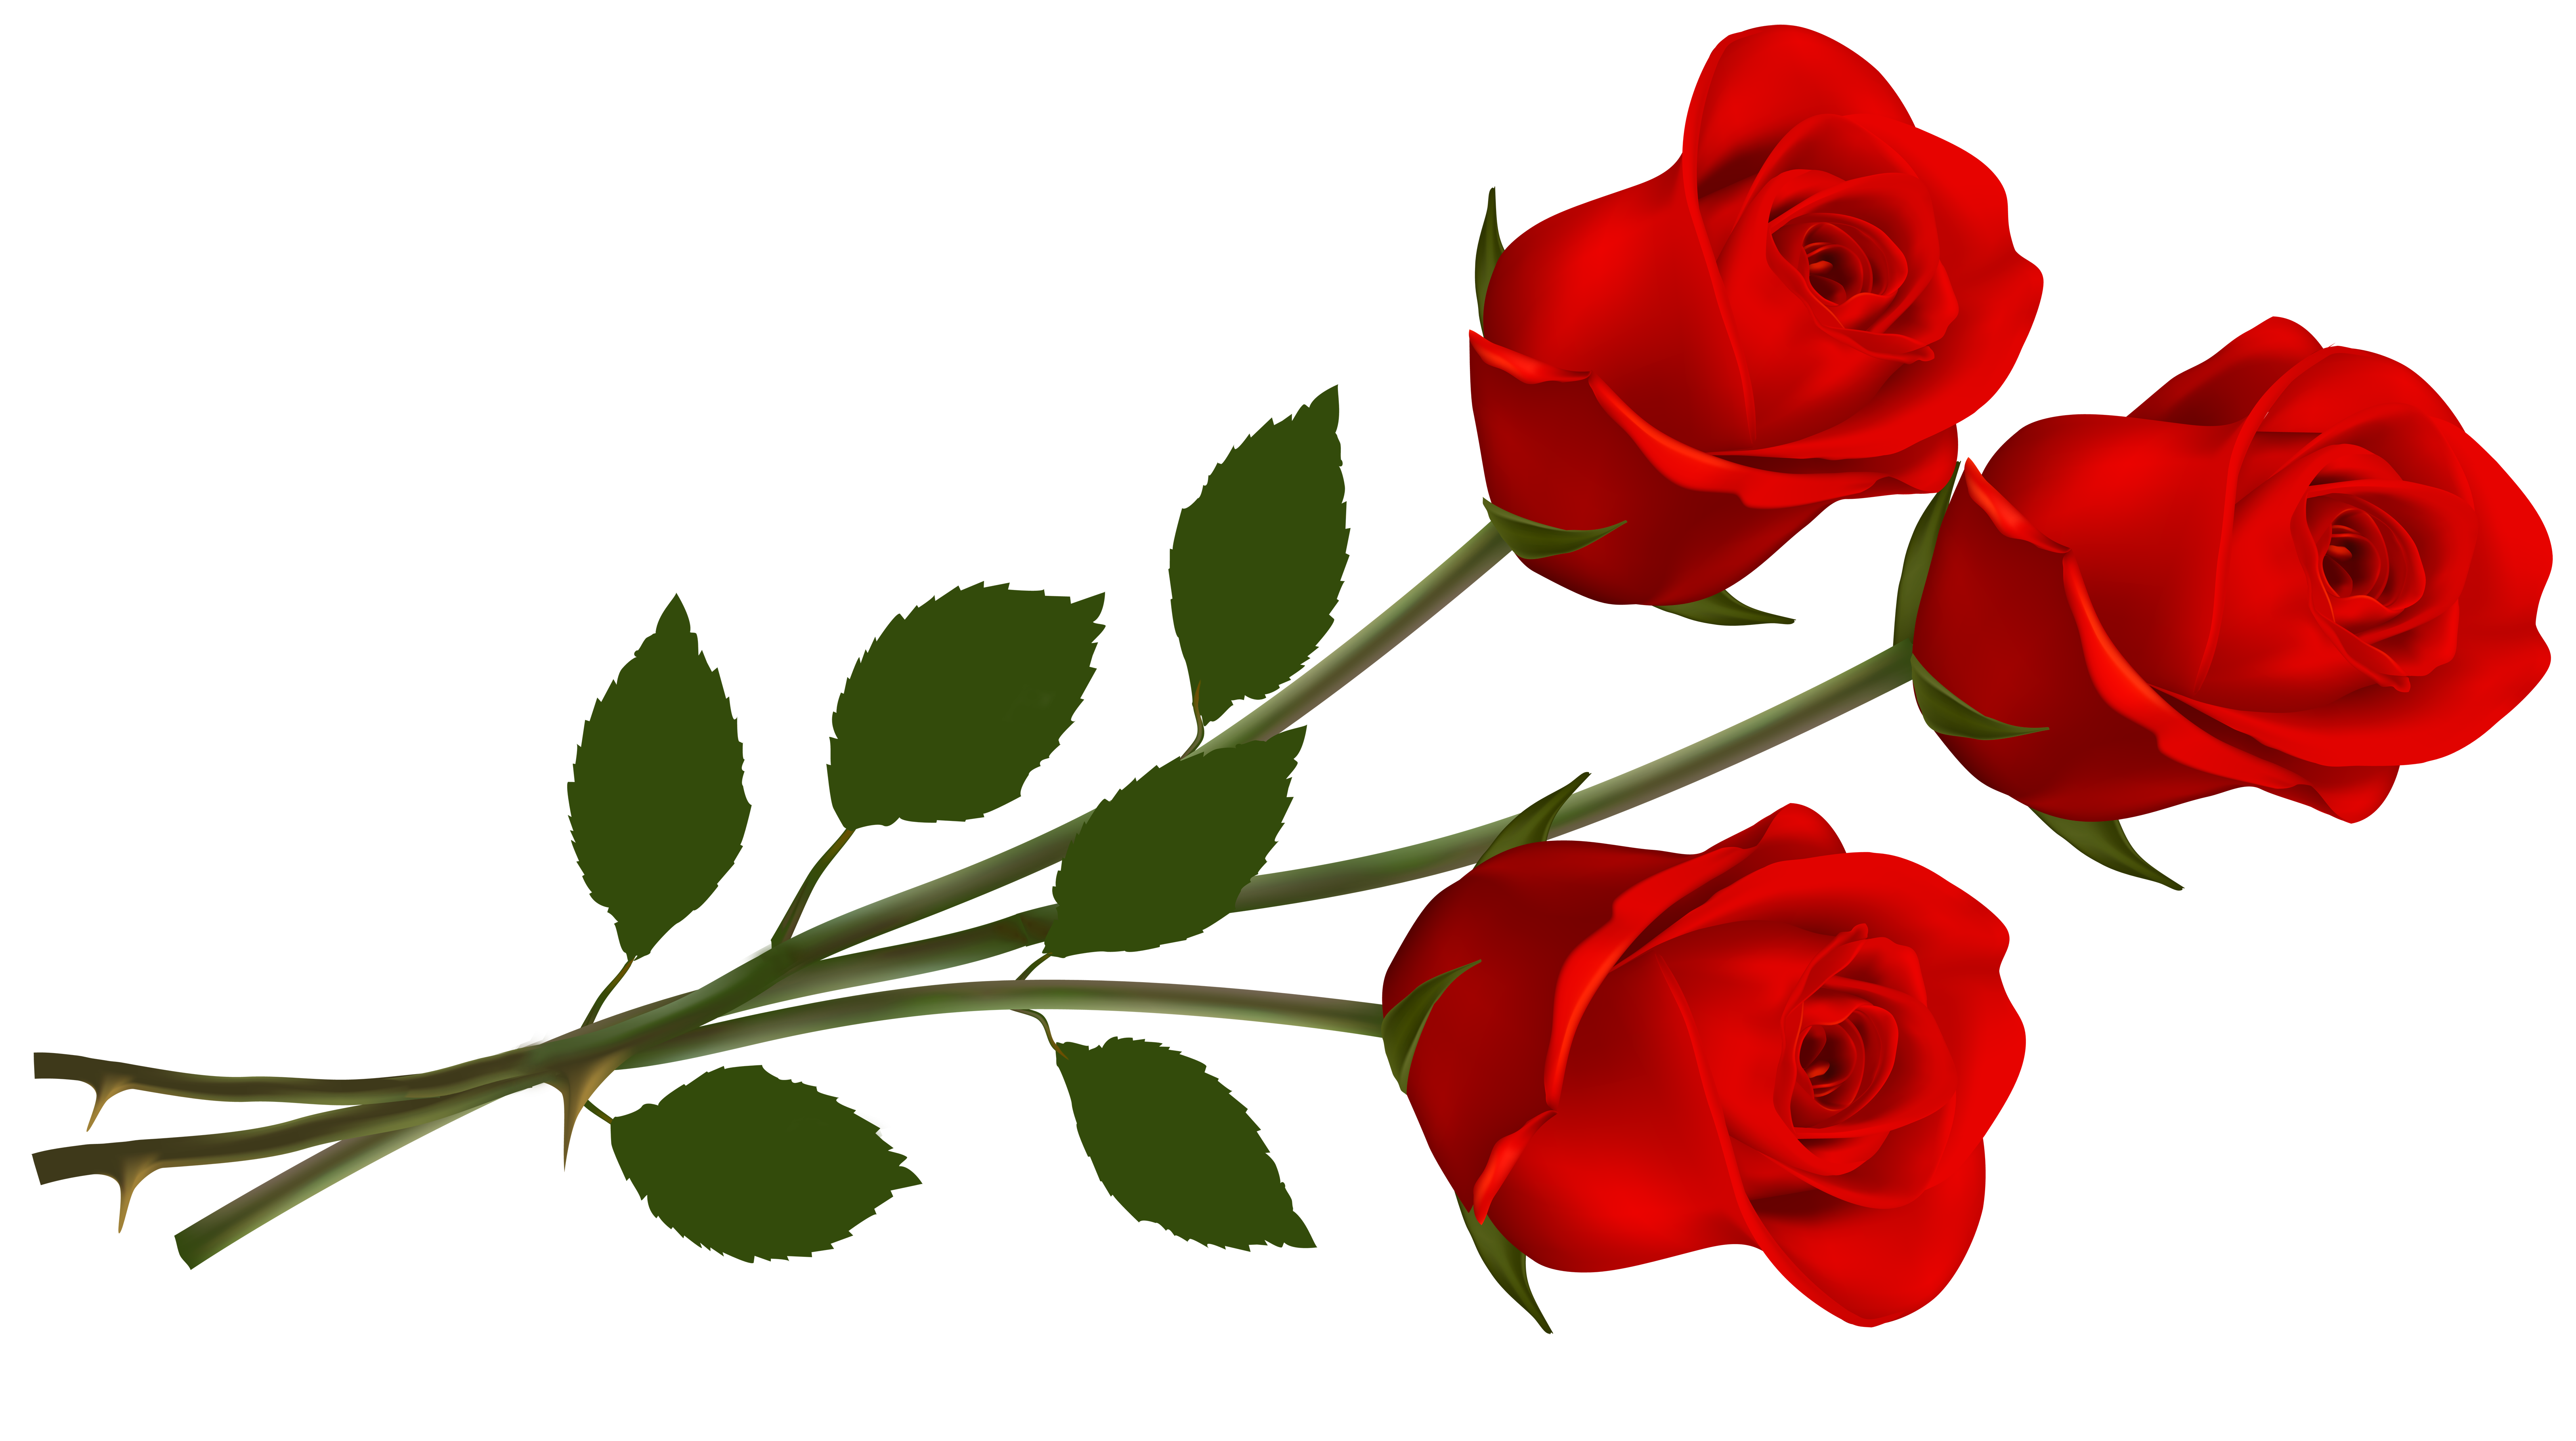 Red Rose Clipart | Free Downl